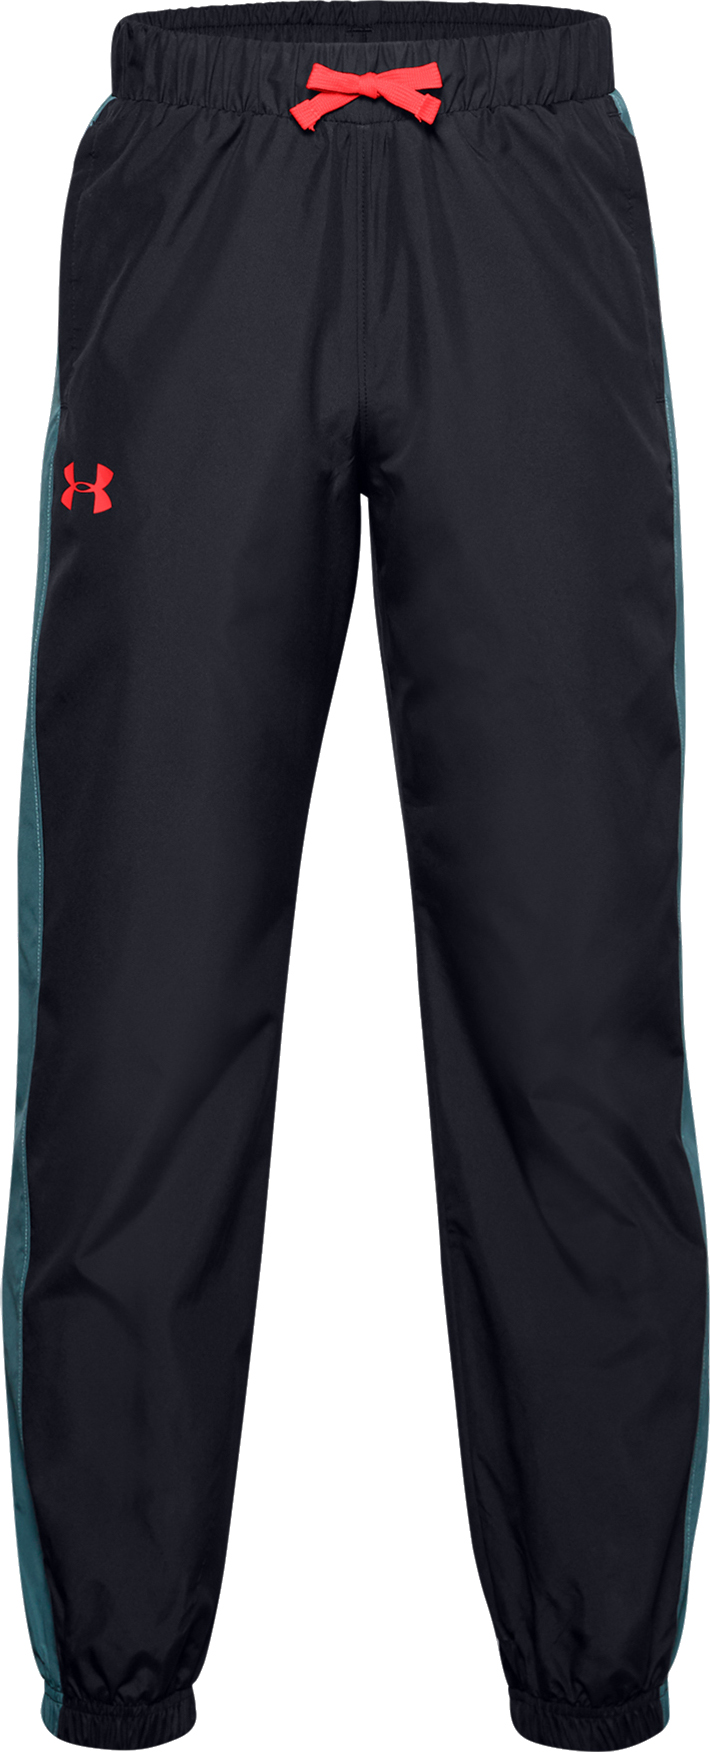 Nohavice Under Armour UA Mesh Lined Pants